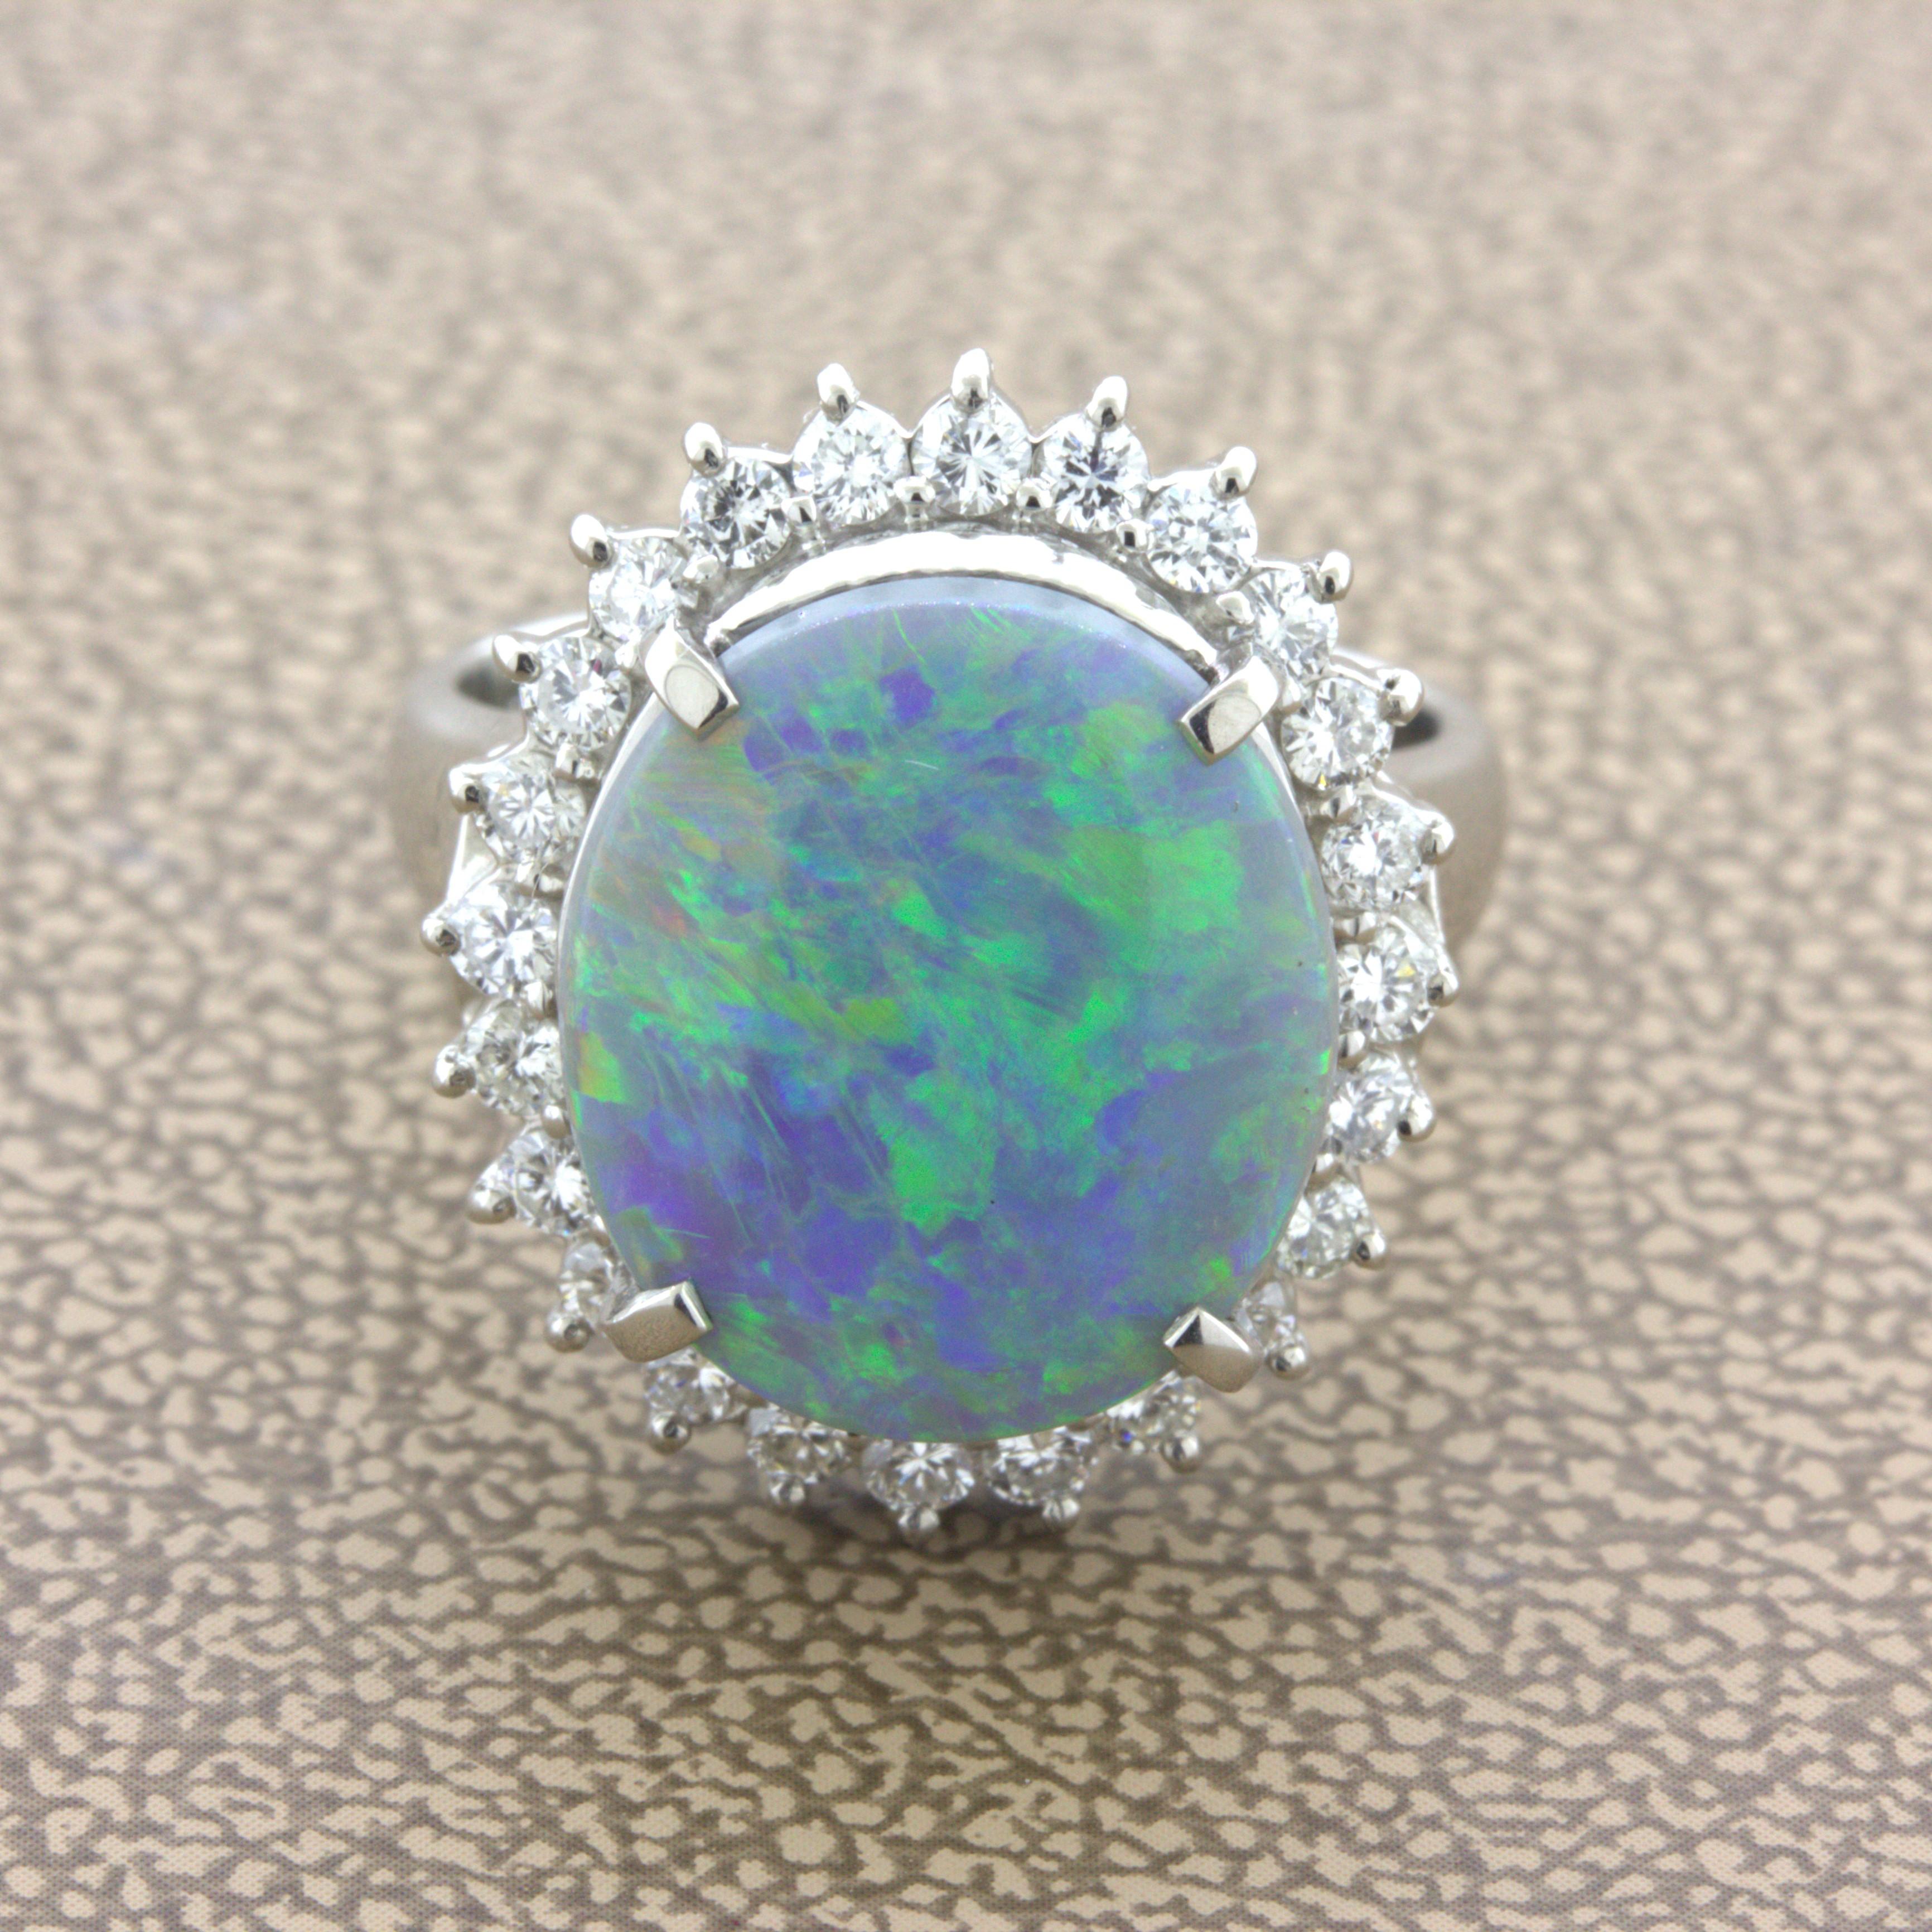 A lovely Australia black opal and diamond ring hand-fabricated in platinum. The opal weighs 4.44 carats and has strong play-of-color as various colors can be seen across the stone. Colors include green, orange, yellow and blue. It is complemented by